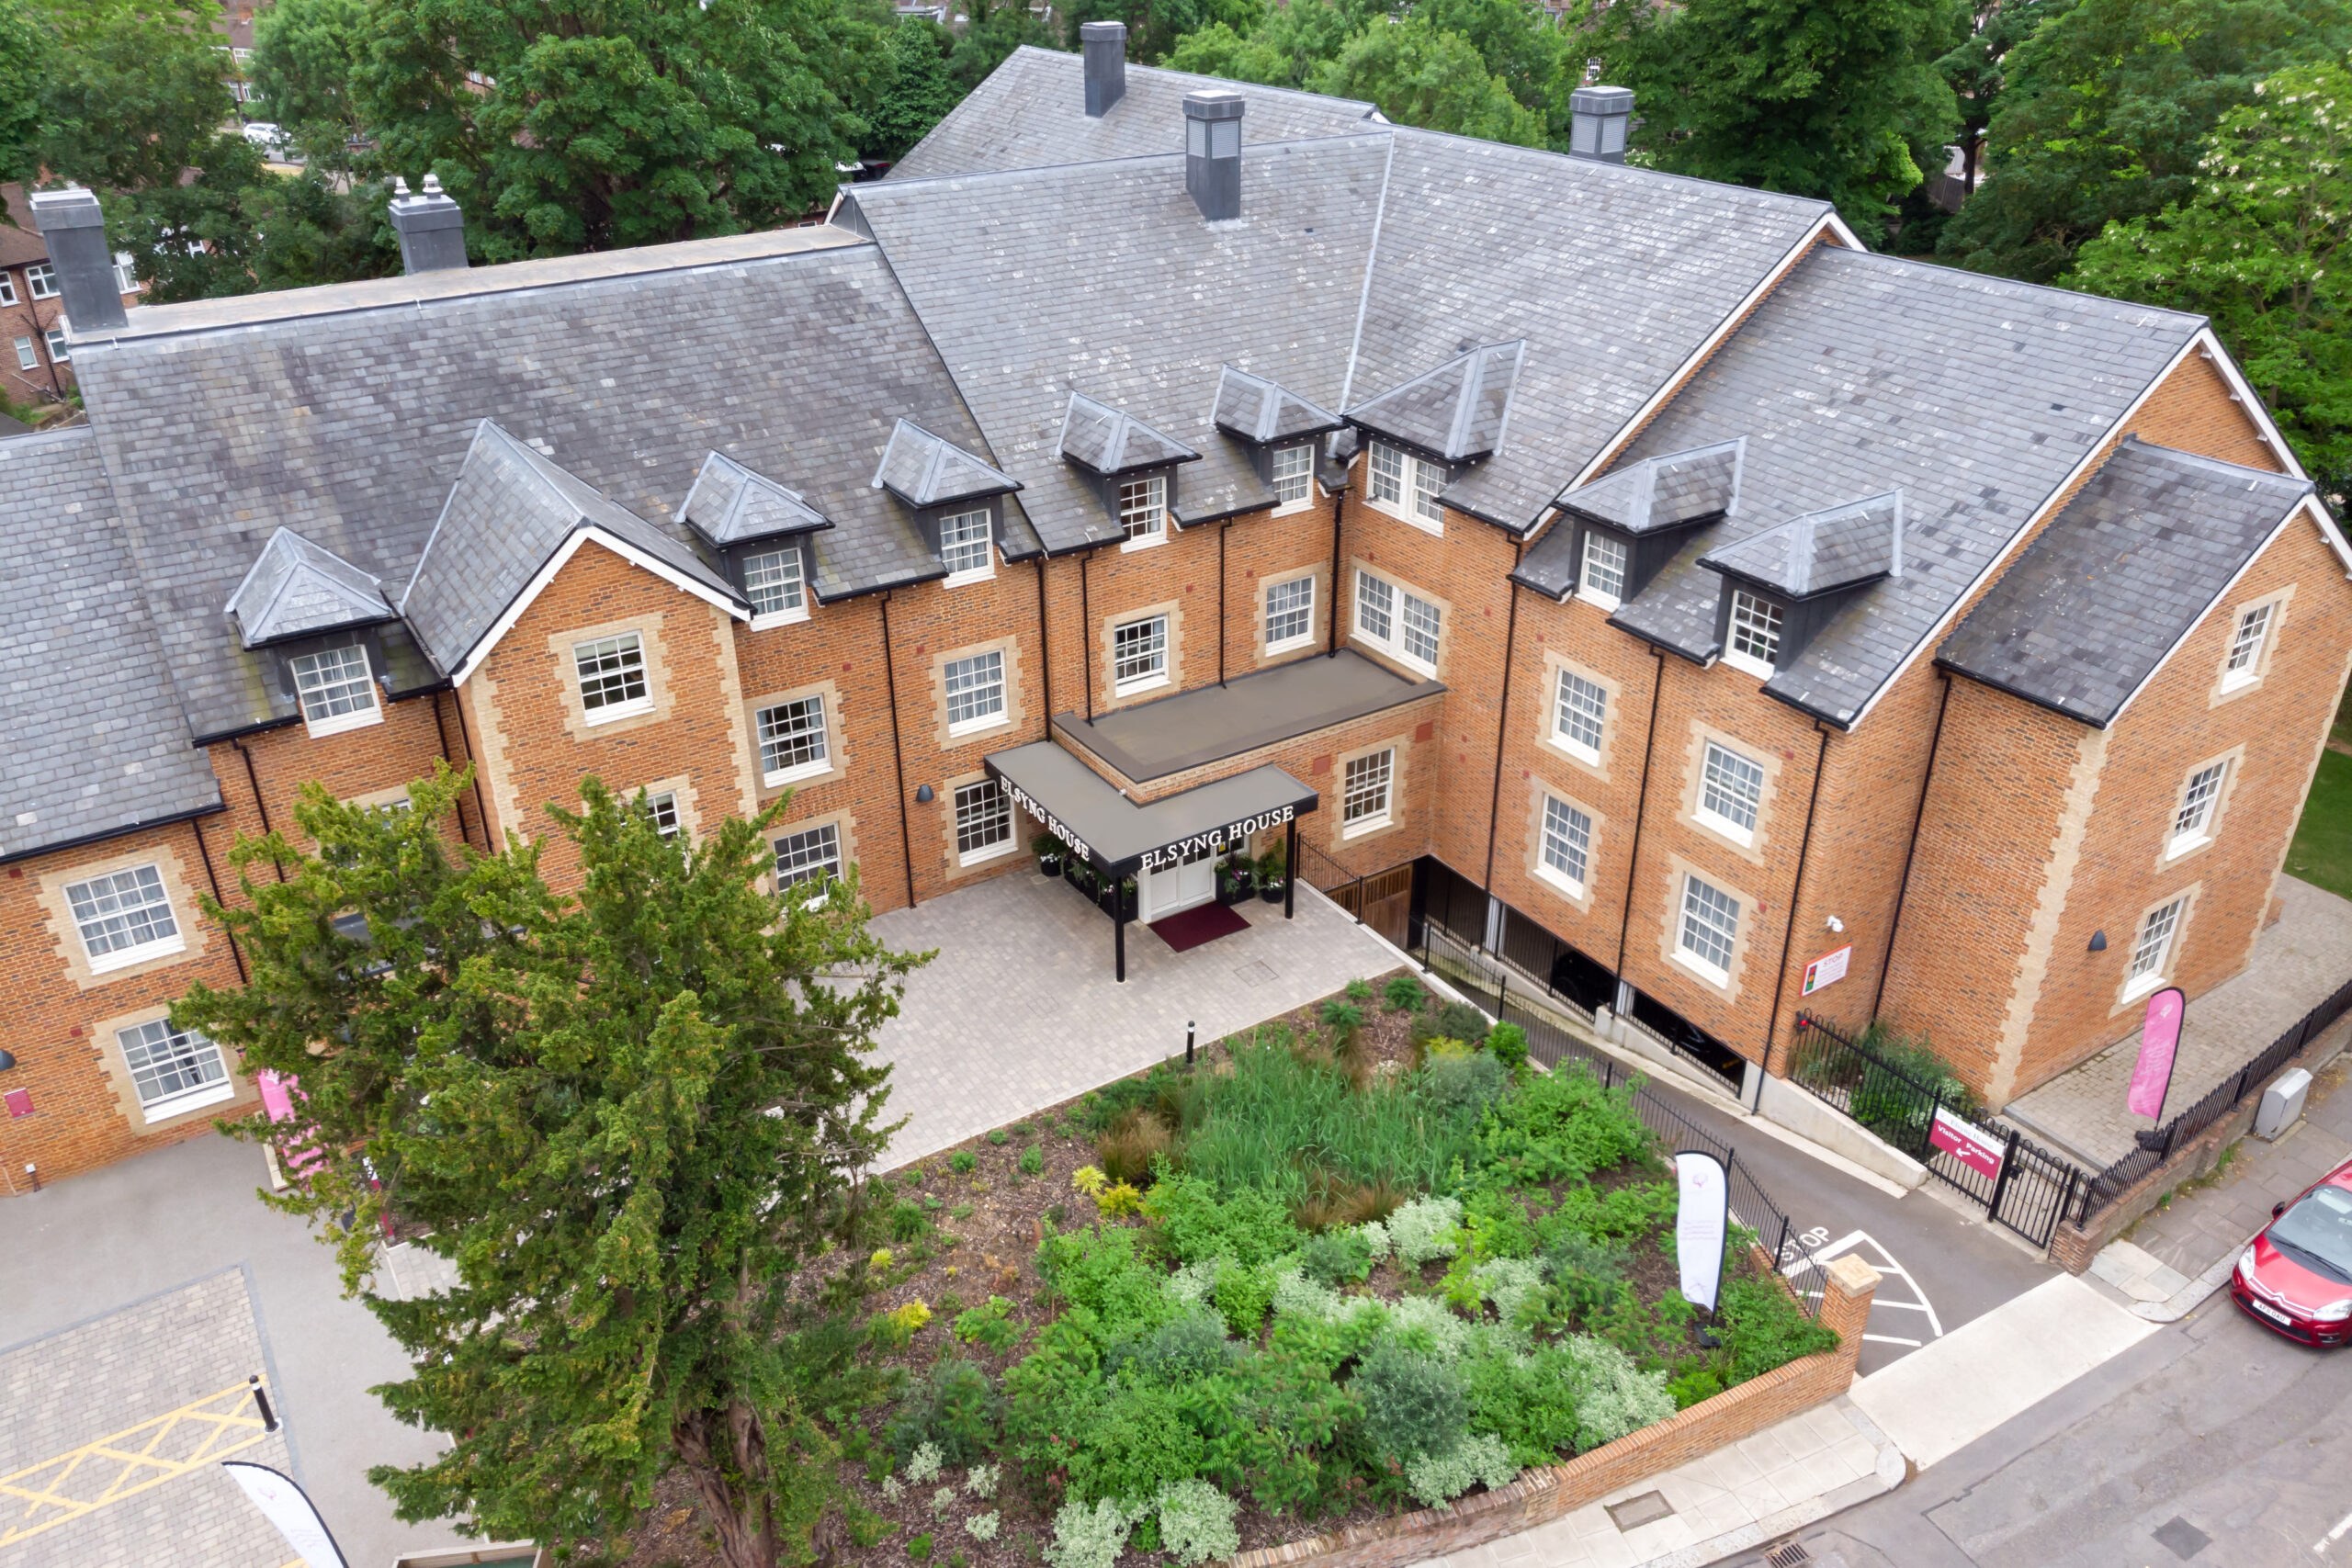 Aerial view of Elsyng House Care Home in Enfield, Greater London